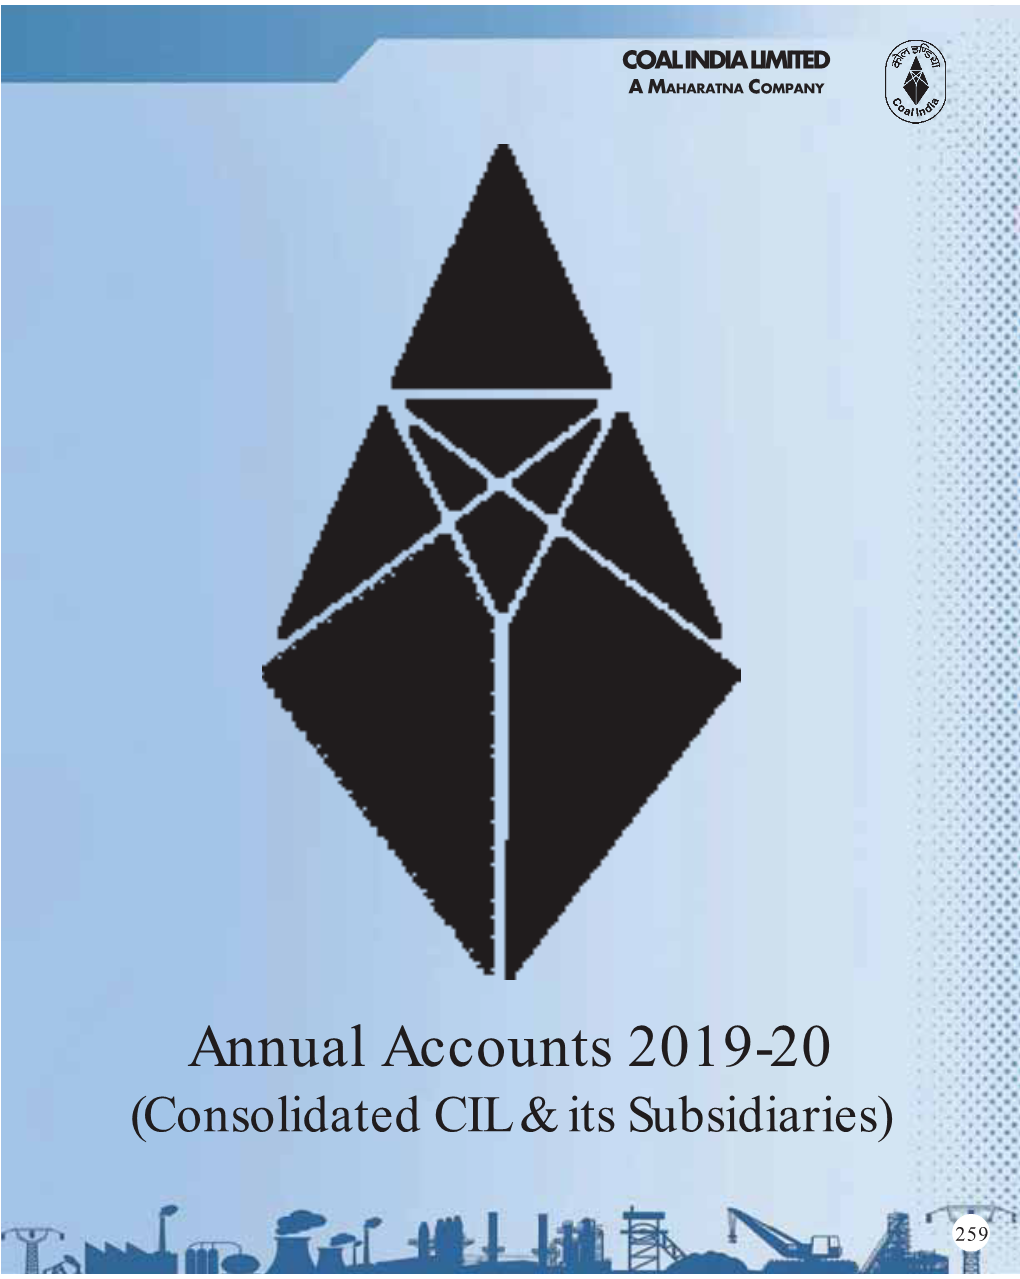 Annual Accounts 2019-20 (Consolidated CIL & Its Subsidiaries)